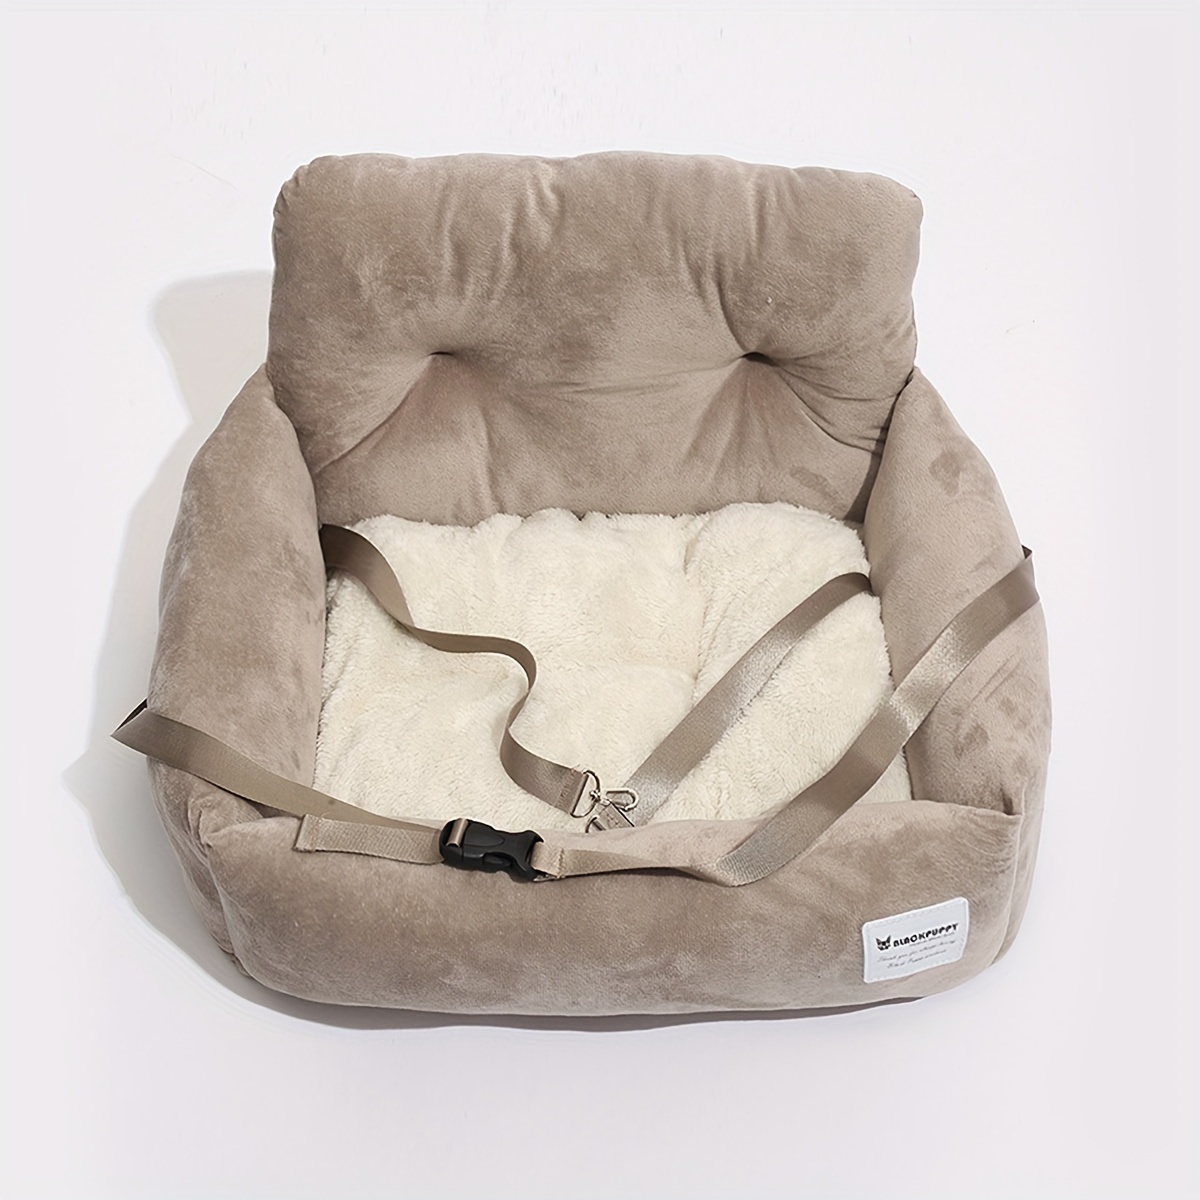 Car seat for dogs -  France